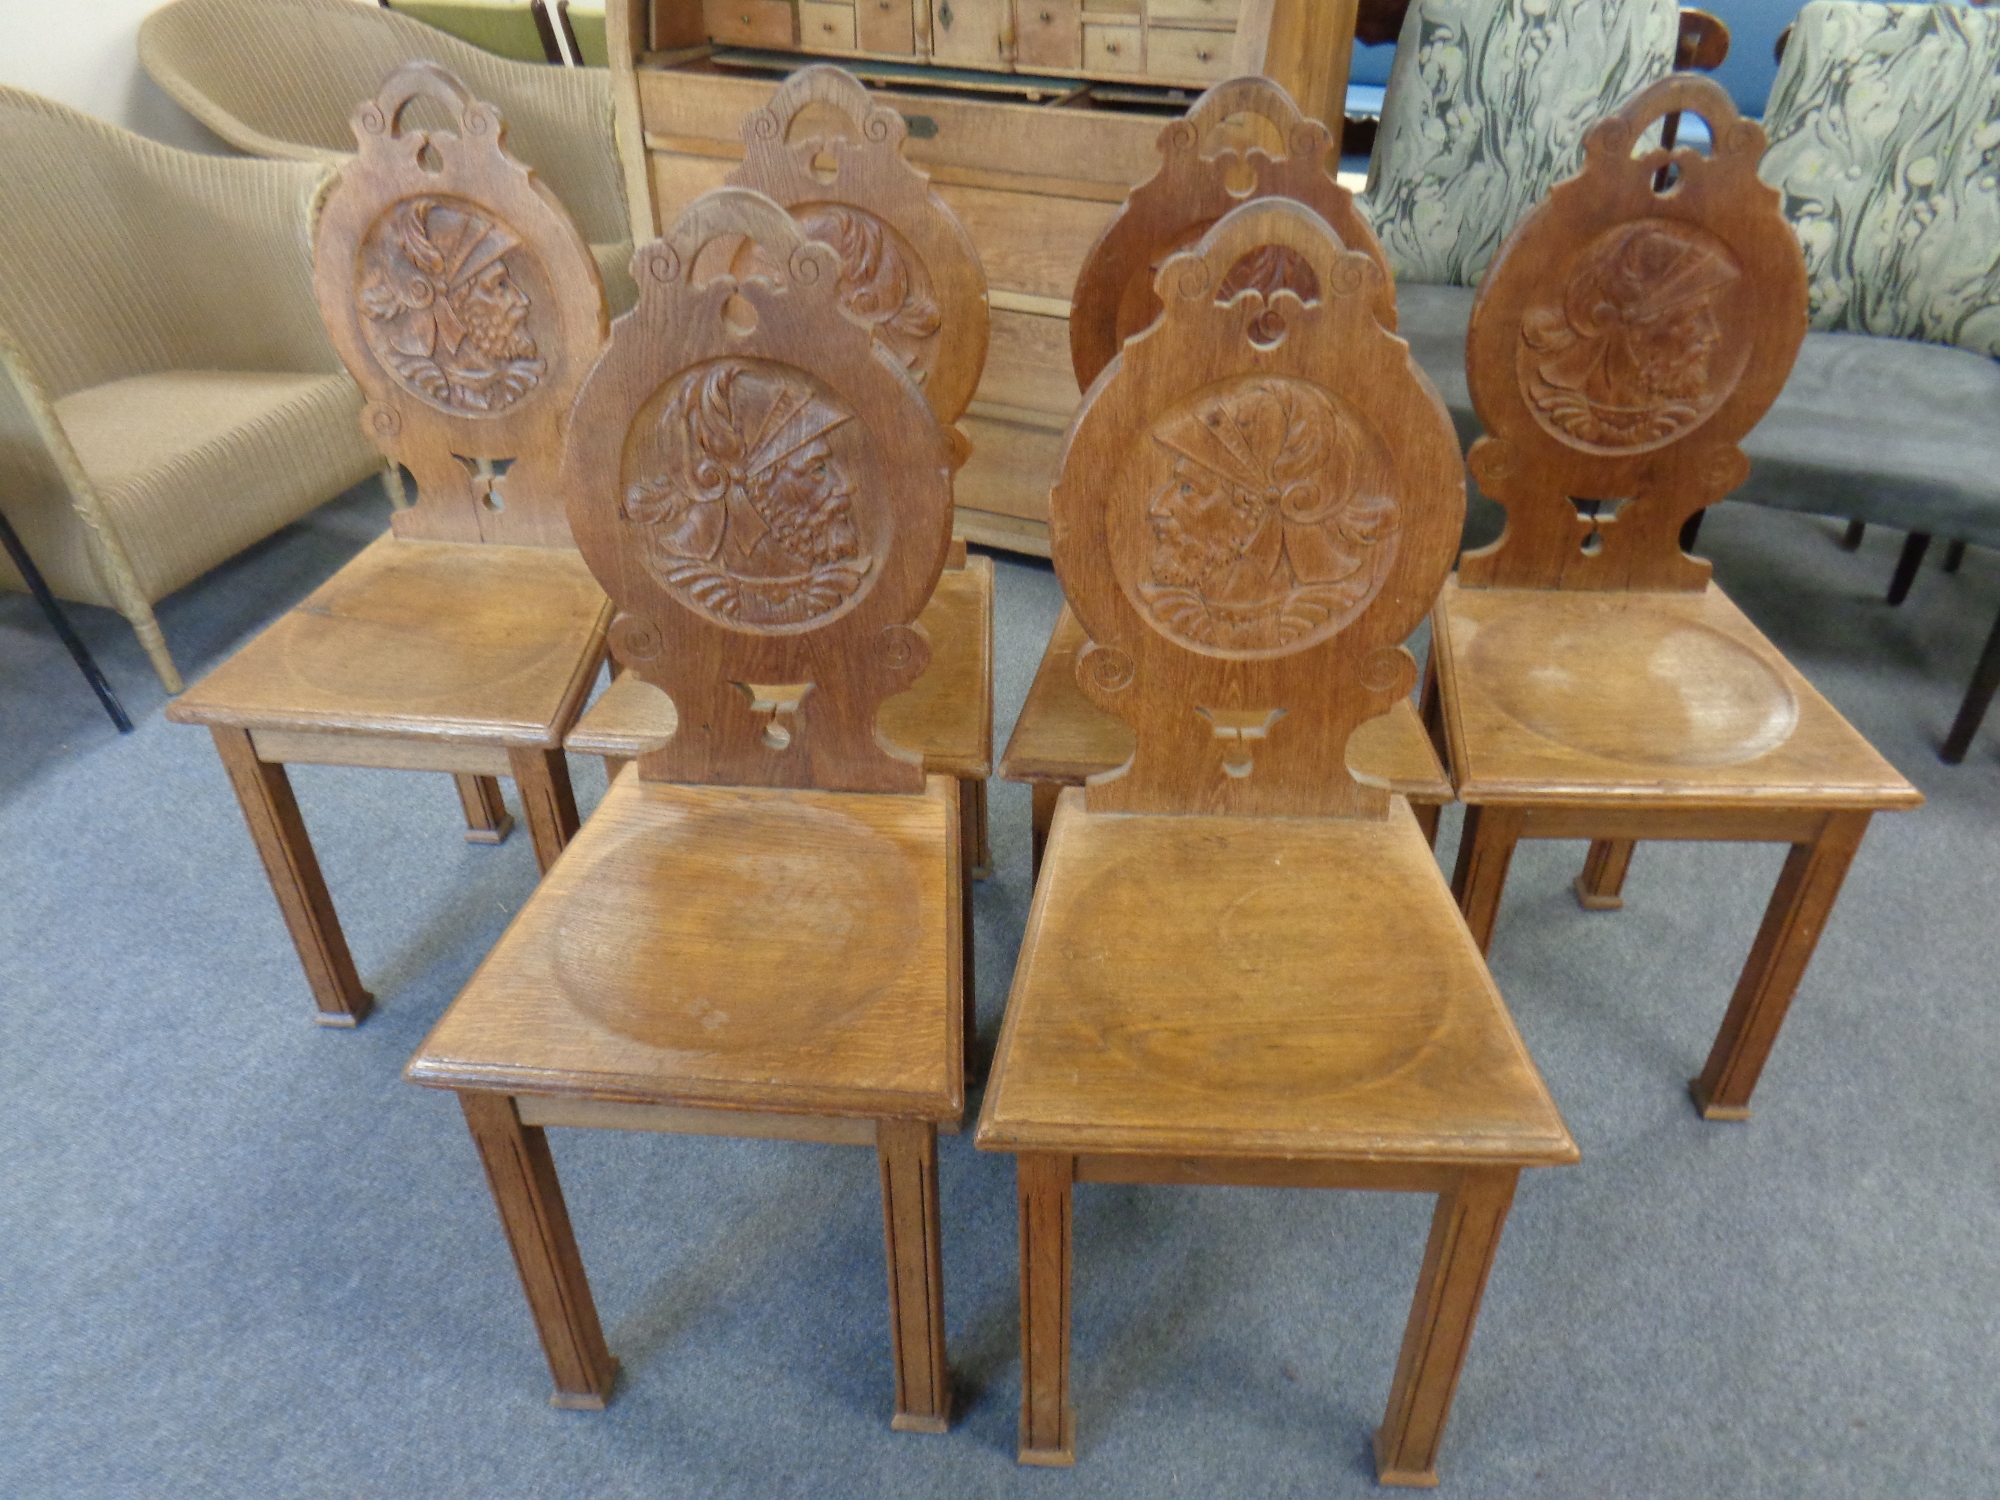 A set of six 20th century carved oak dining chairs